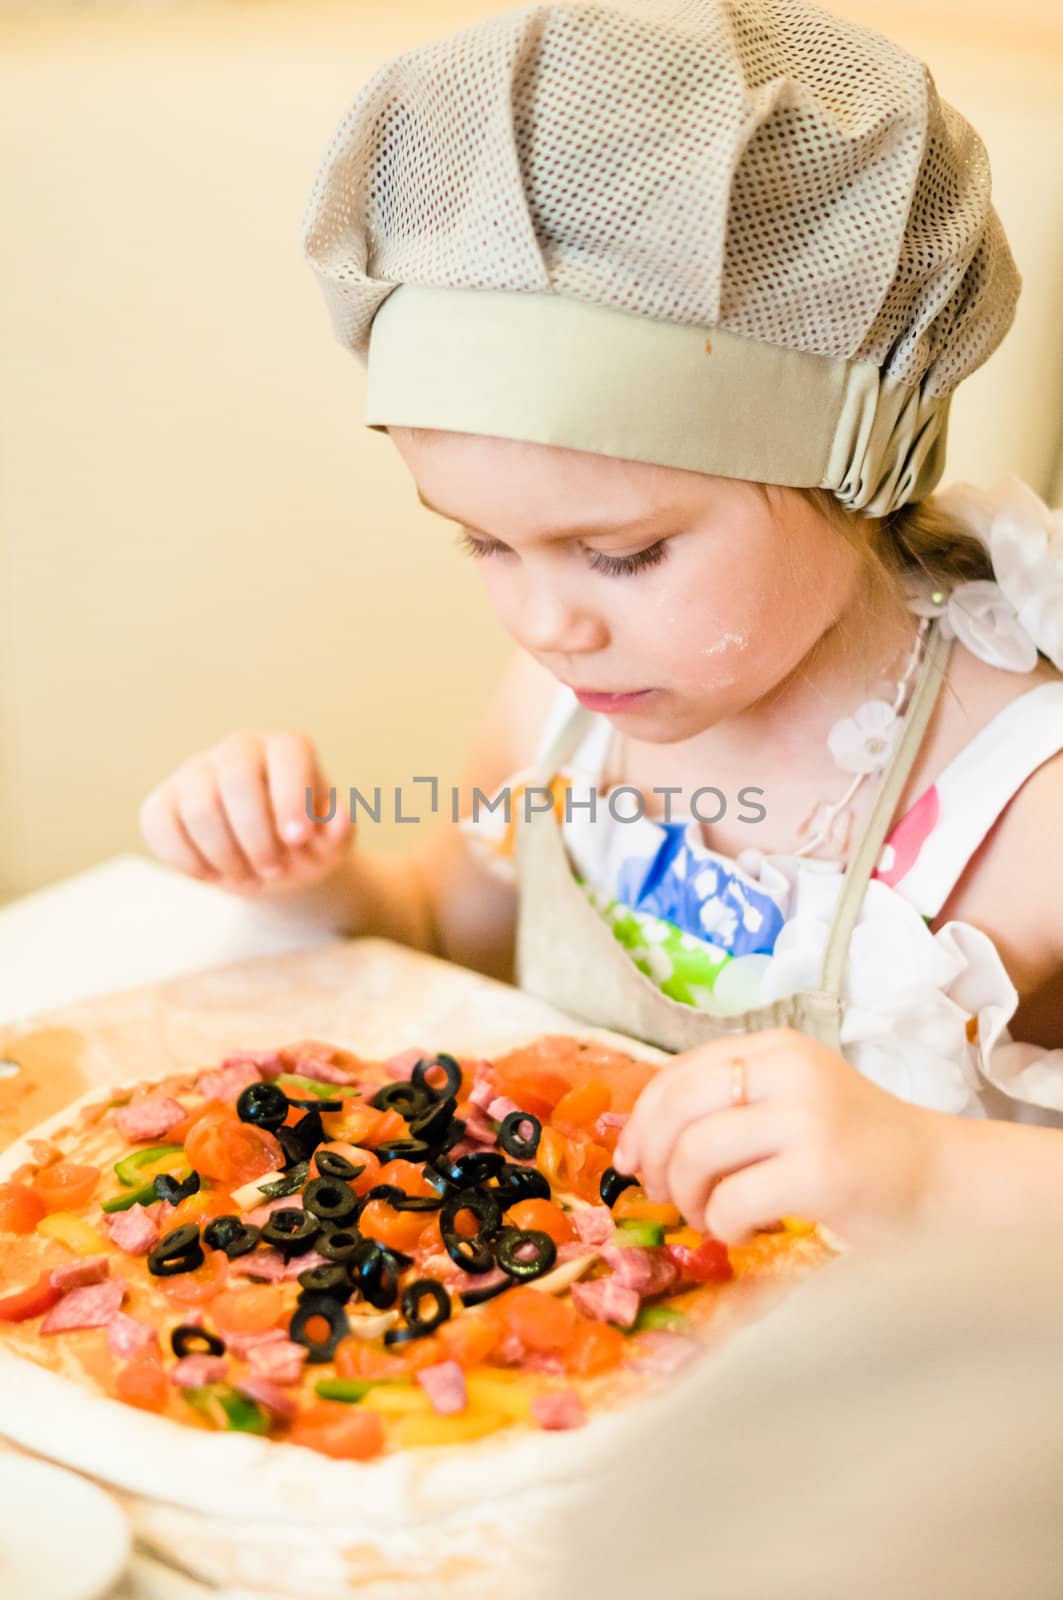 Little girl adding ingredients, vegetables and meat, in pizza